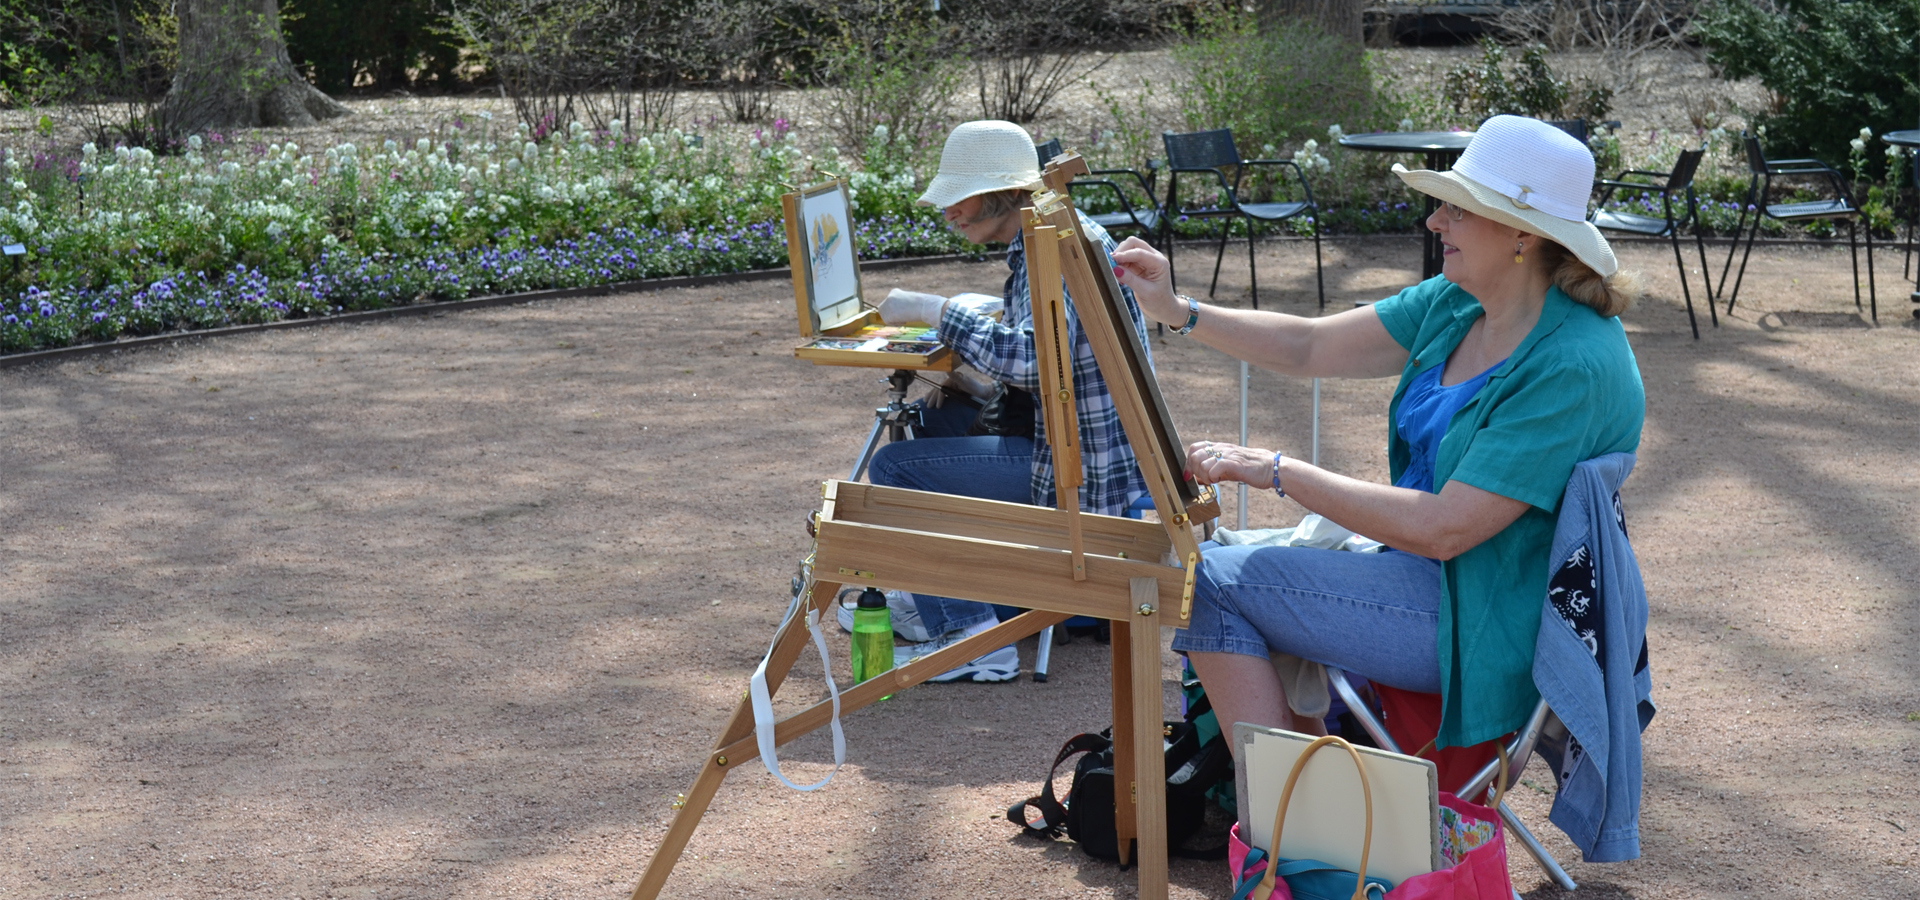 Artists painting in arbor court in spring